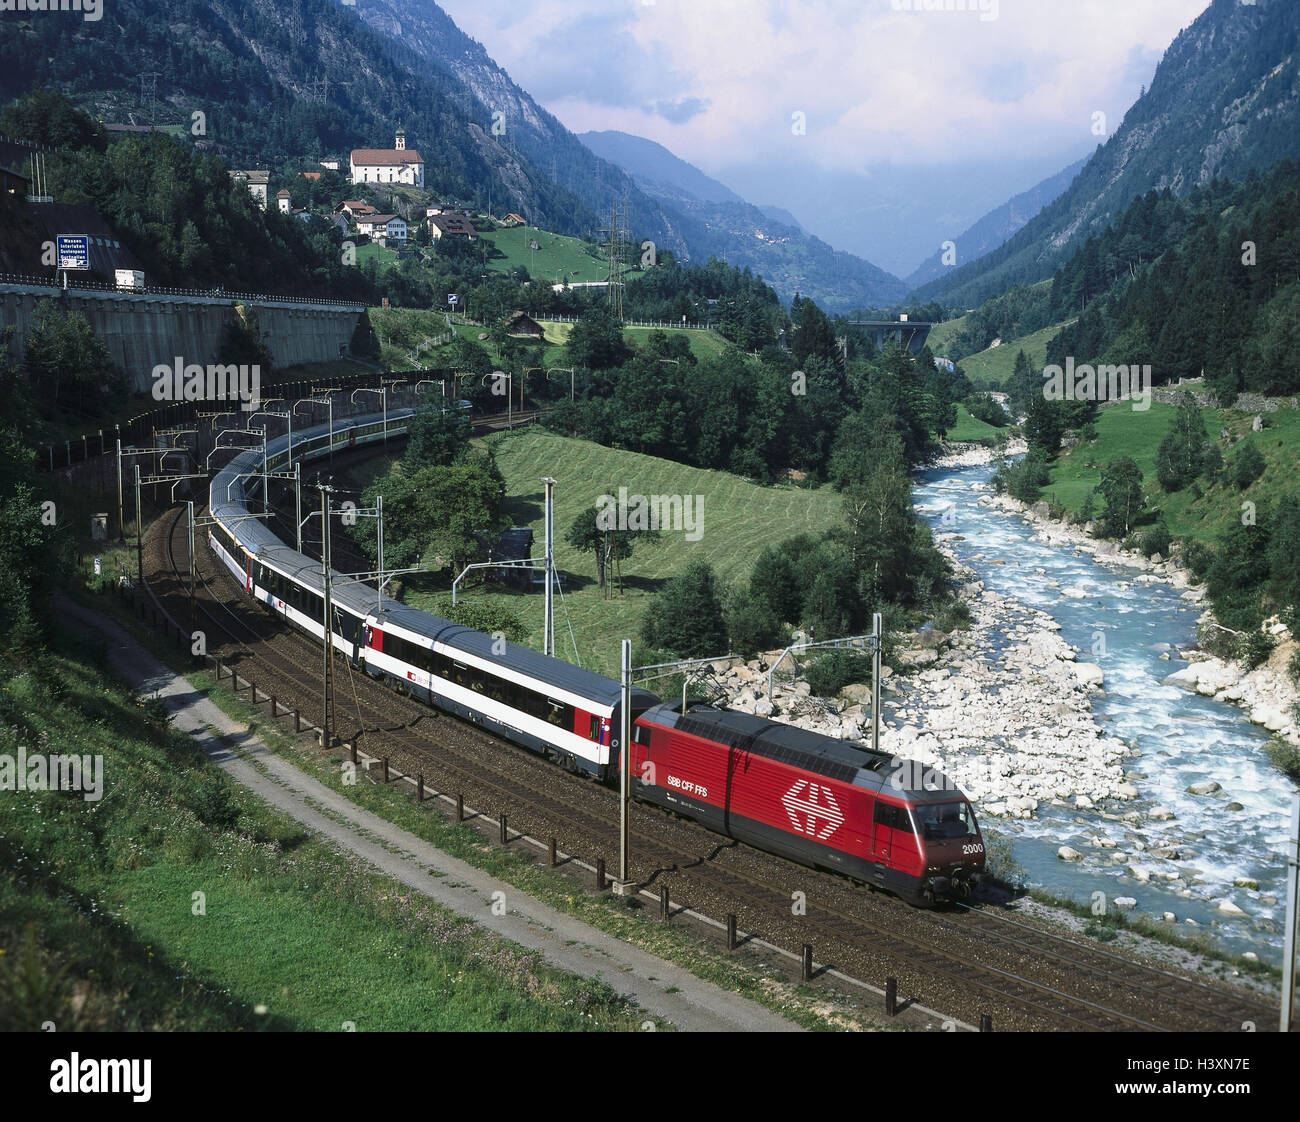 Switzerland, Uri, God's hard pass, Wassen, local view, section, travel train, Europe, rail transport, train, trajectory, means transportation, publicly, transport, promotion, tourism, traffic facilities, railway, railroad connection, outside Stock Photo